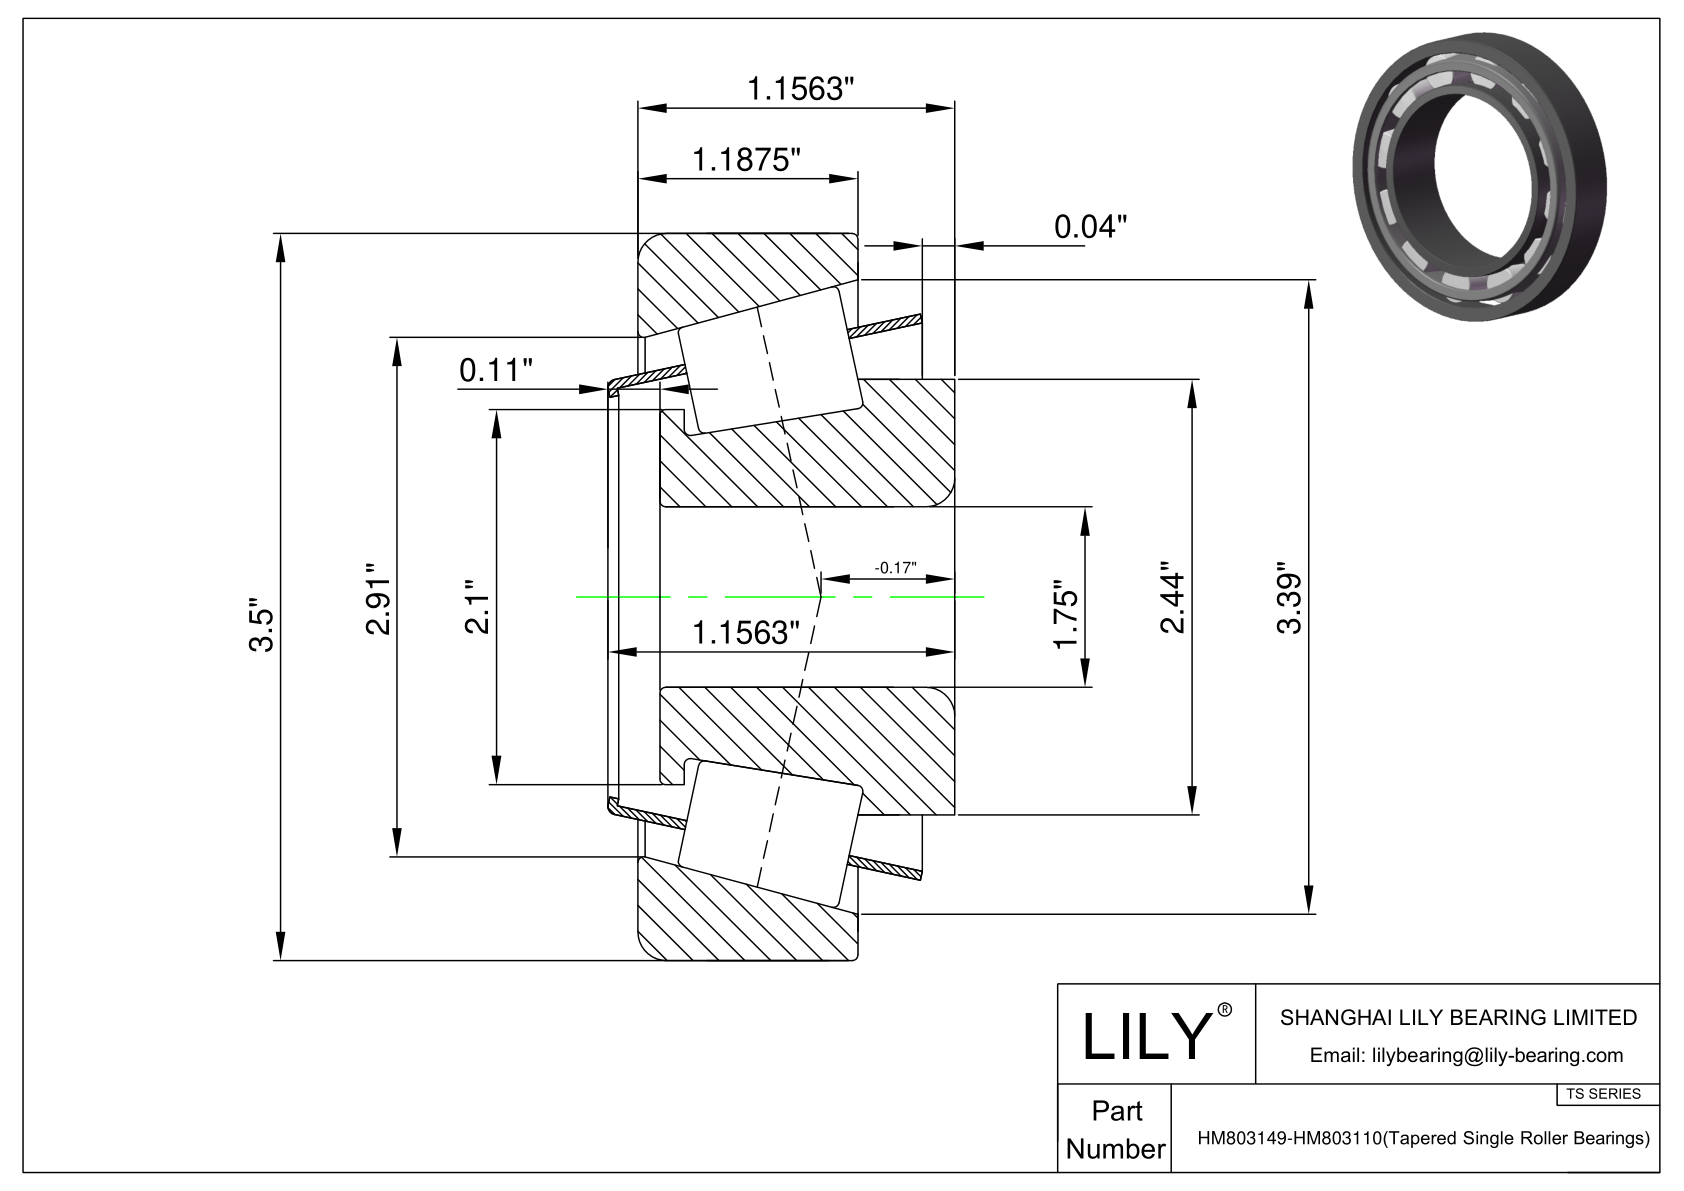 HM803149-HM803110 TS (Tapered Single Roller Bearings) (Imperial) cad drawing